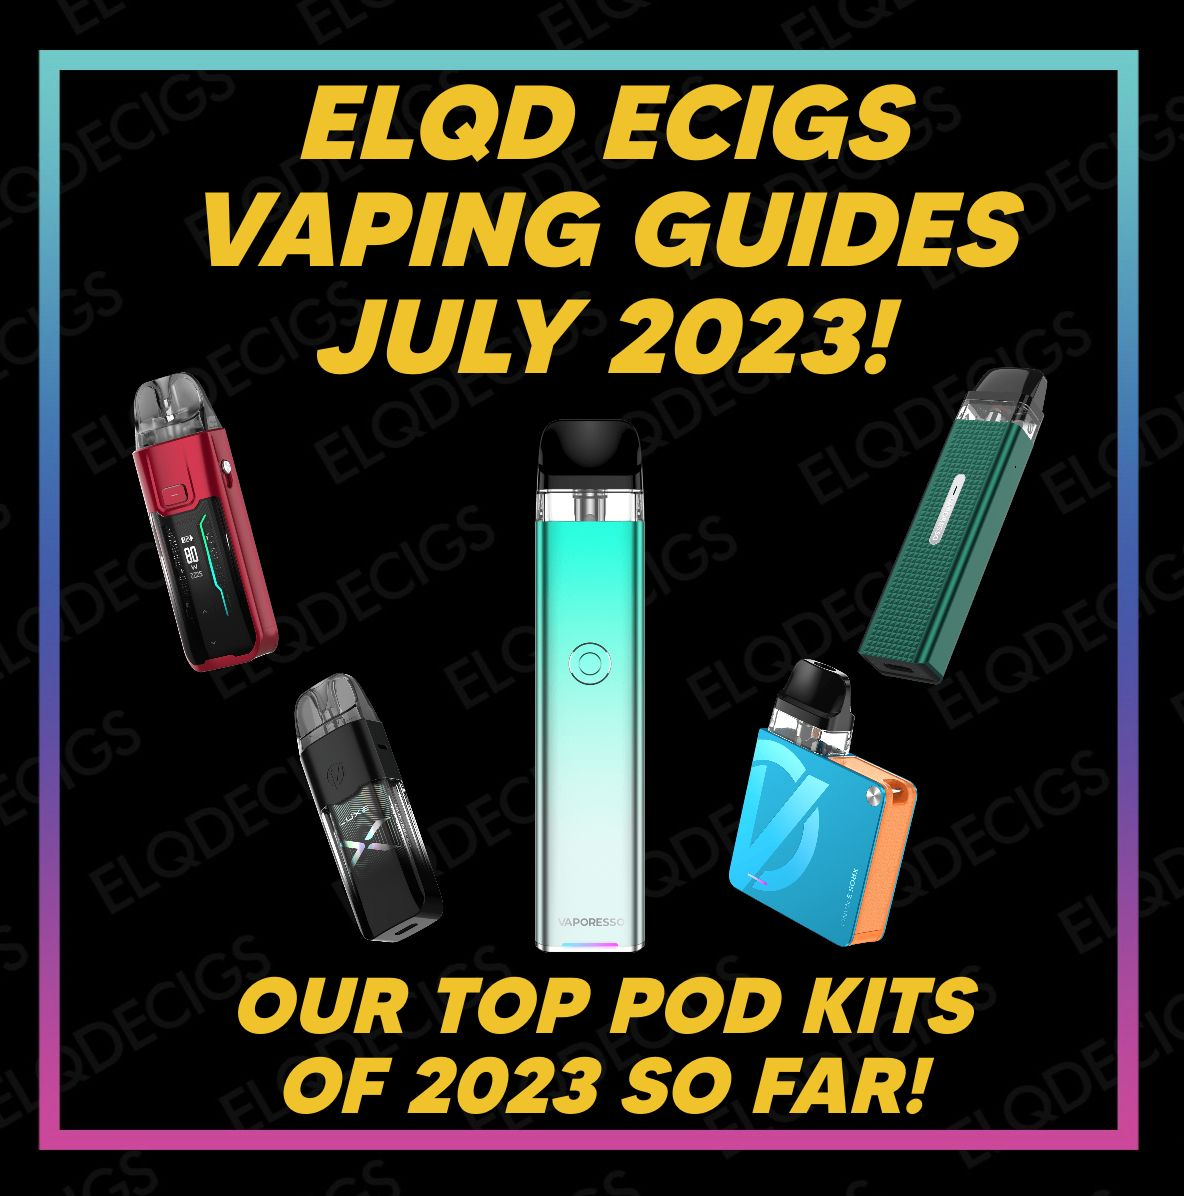 You Are Currently Viewing Our Top Pod Kits Of 2023 So Far! Elqd Ecigs July 2023 Vaping Guides!